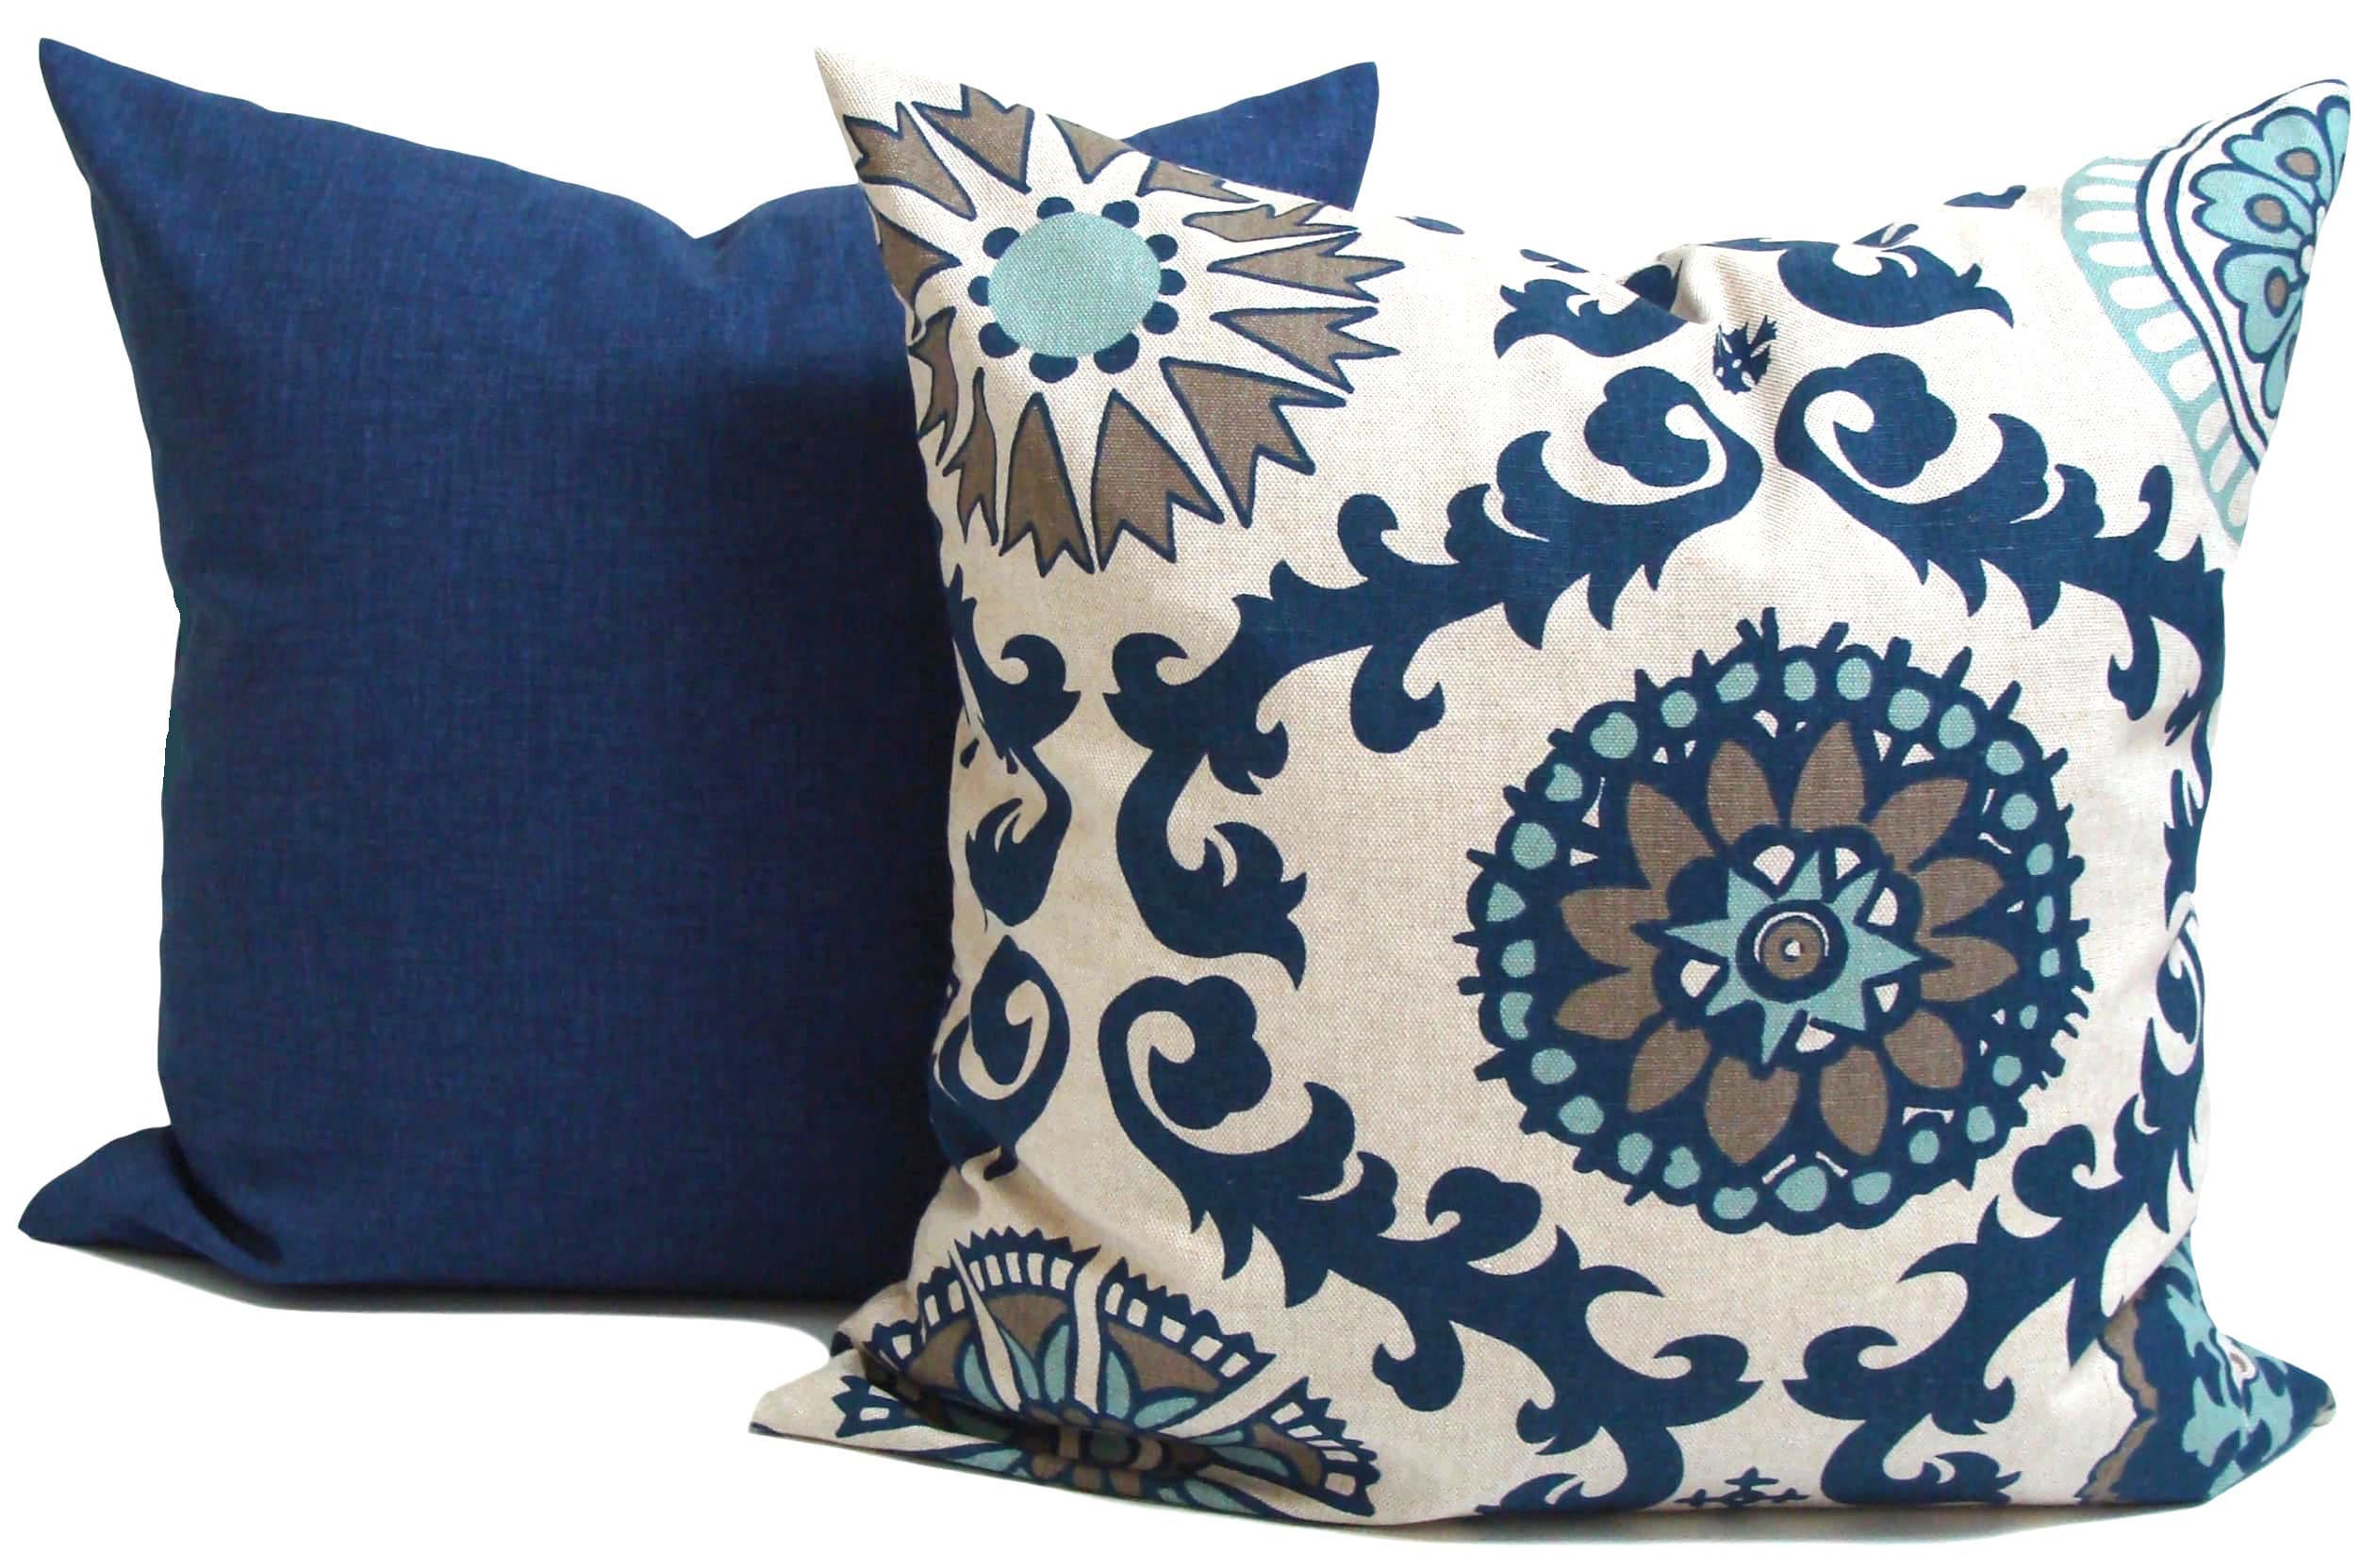 Embroidered “Paper Dolls” Pillow Cover / Japanese Style Beige, Navy, and  Light Blue Decorative Pillow Cover